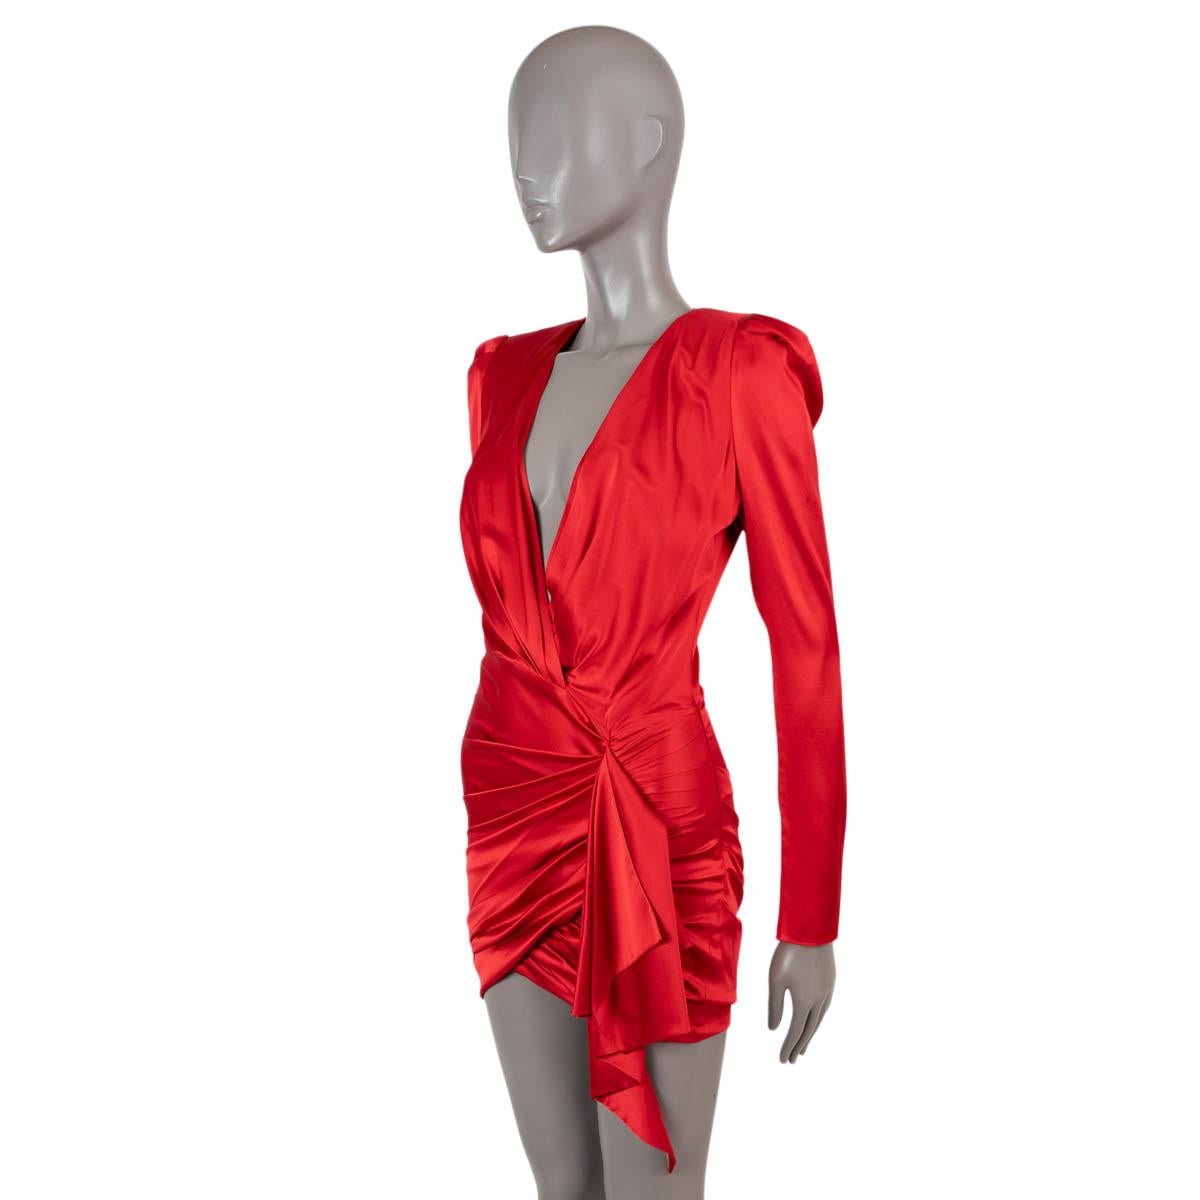 100% authentic Alexander Vauthier mini dress in red silk satin (with 8% elastane). Features long puff sleeves, plunging V neckline and draped front. Has been worn and is in excellent condition.

Measurements
Tag Size	38
Size	S
Shoulder Width	41cm